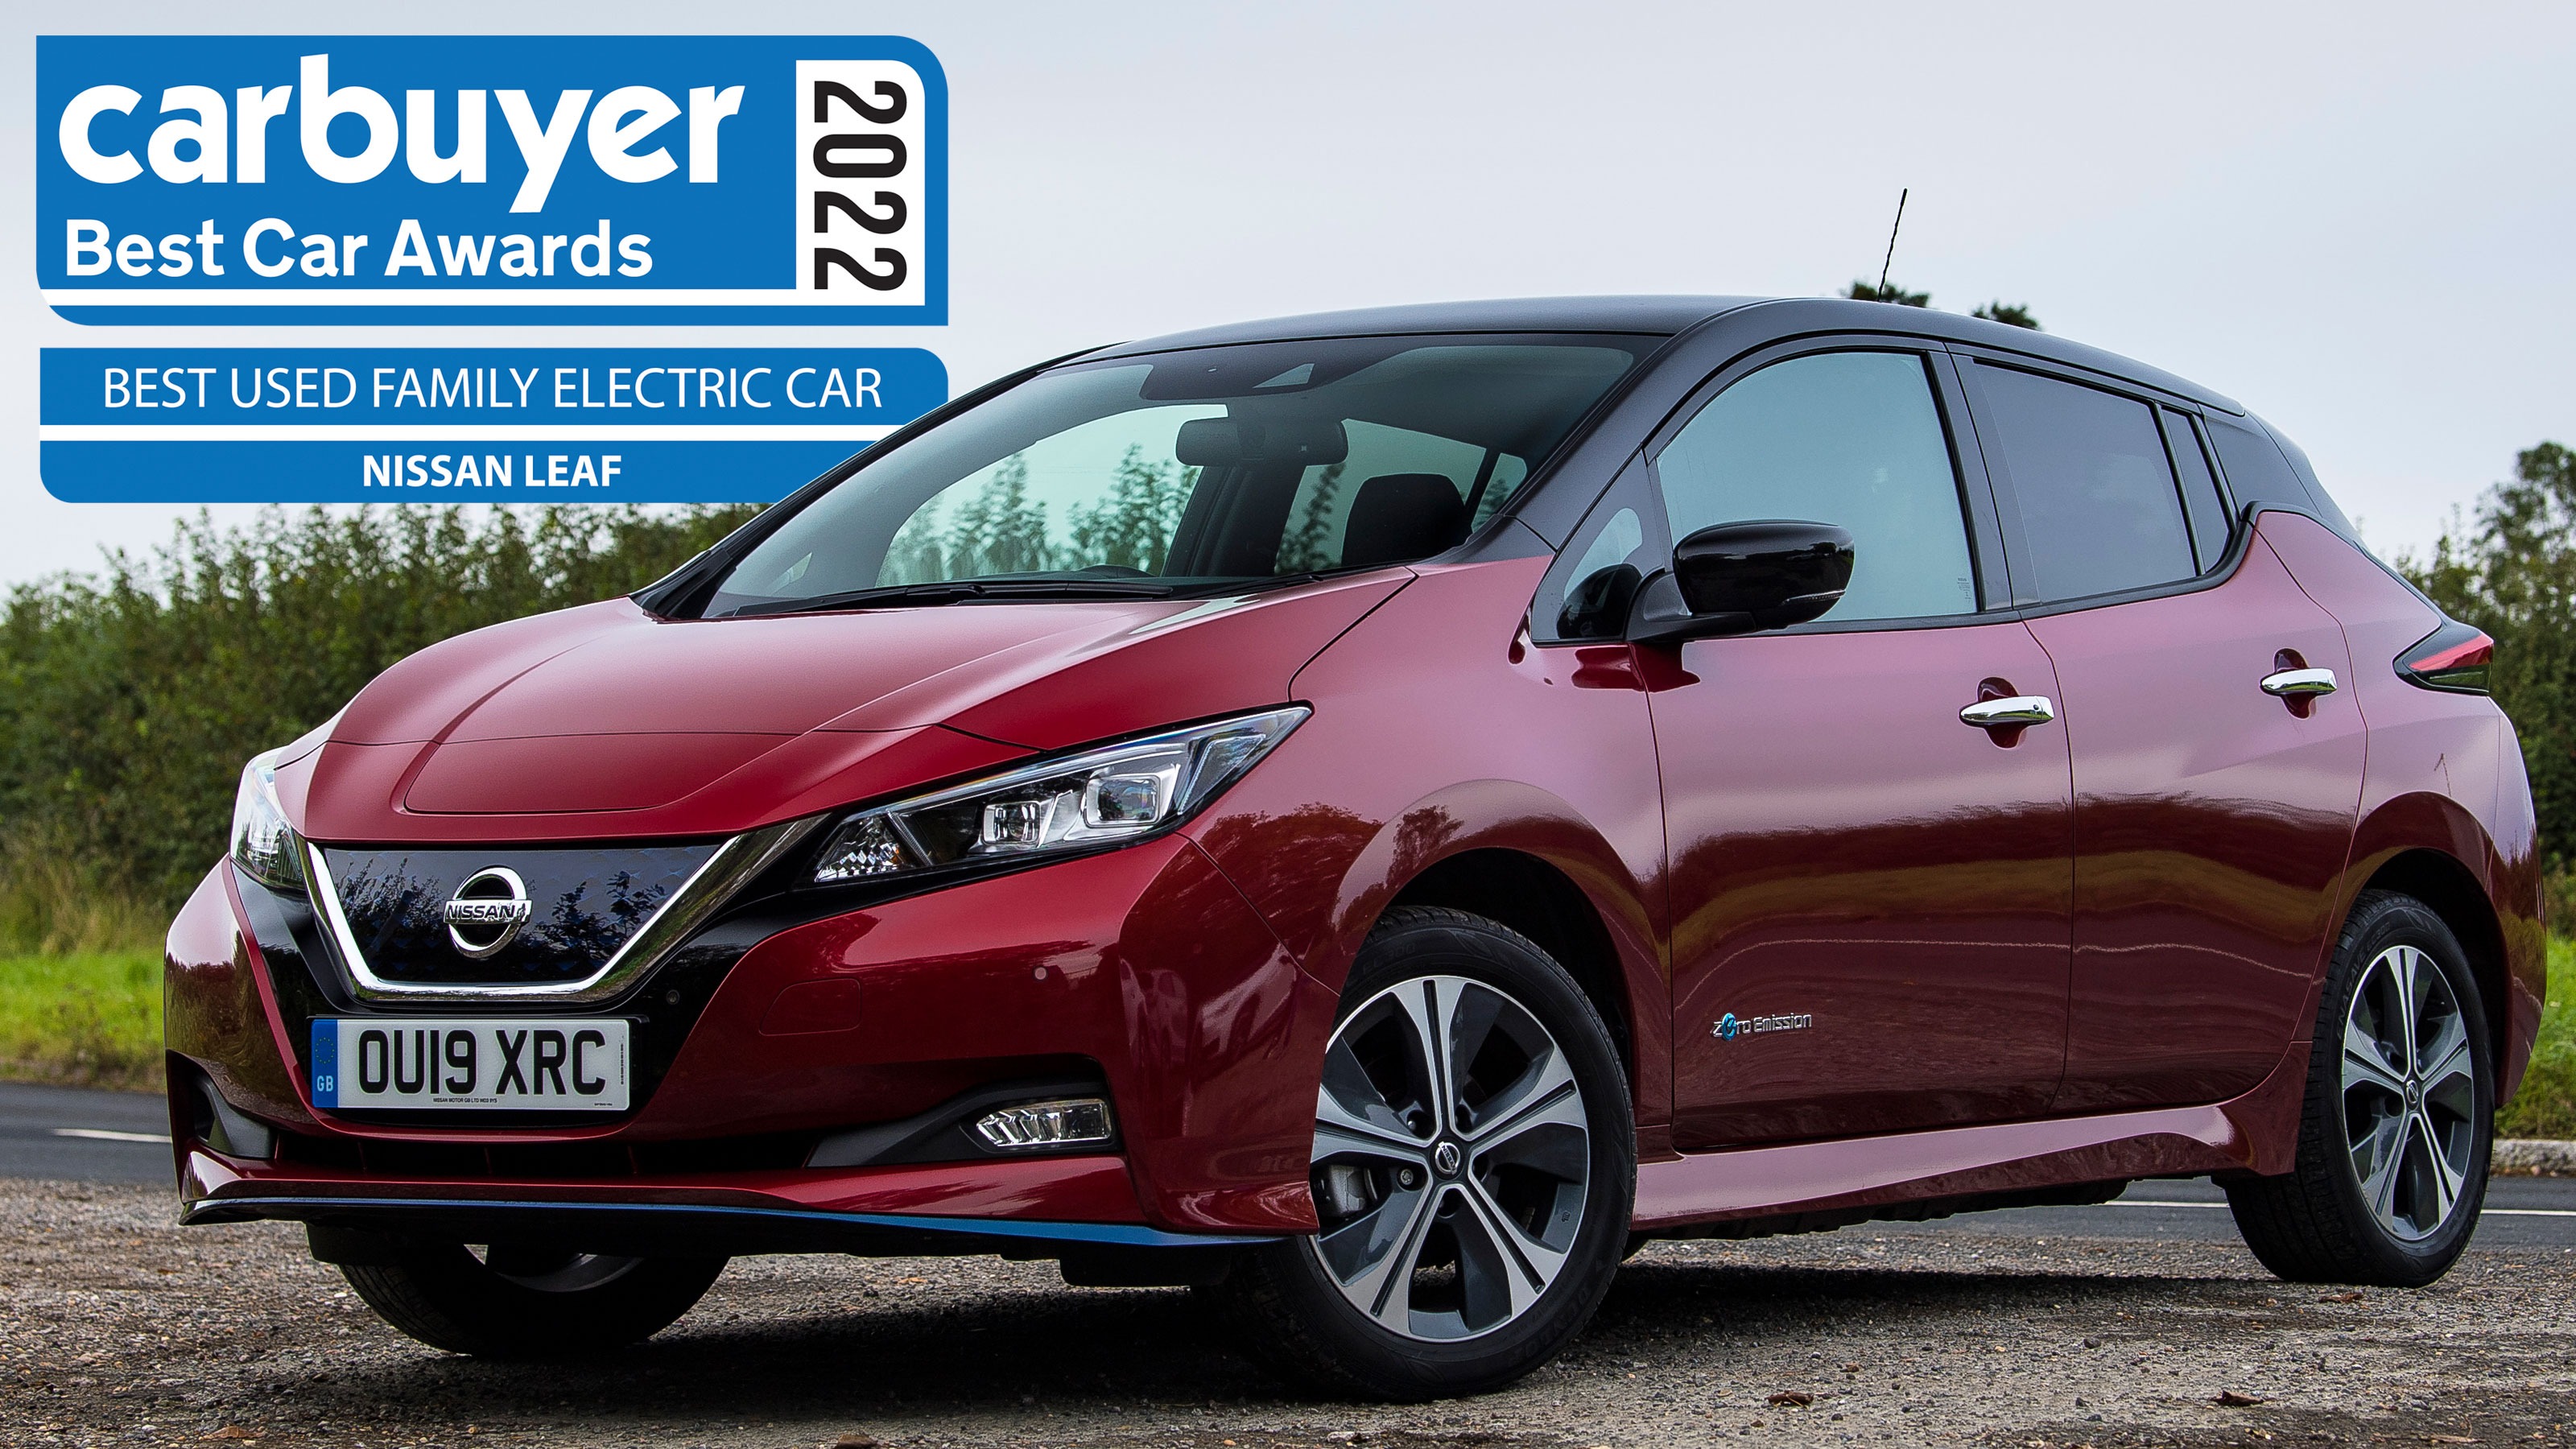 Nissan LEAF named ‘Best Used Family Electric Car’ at 2022 Carbuyer Car of the Year Awards